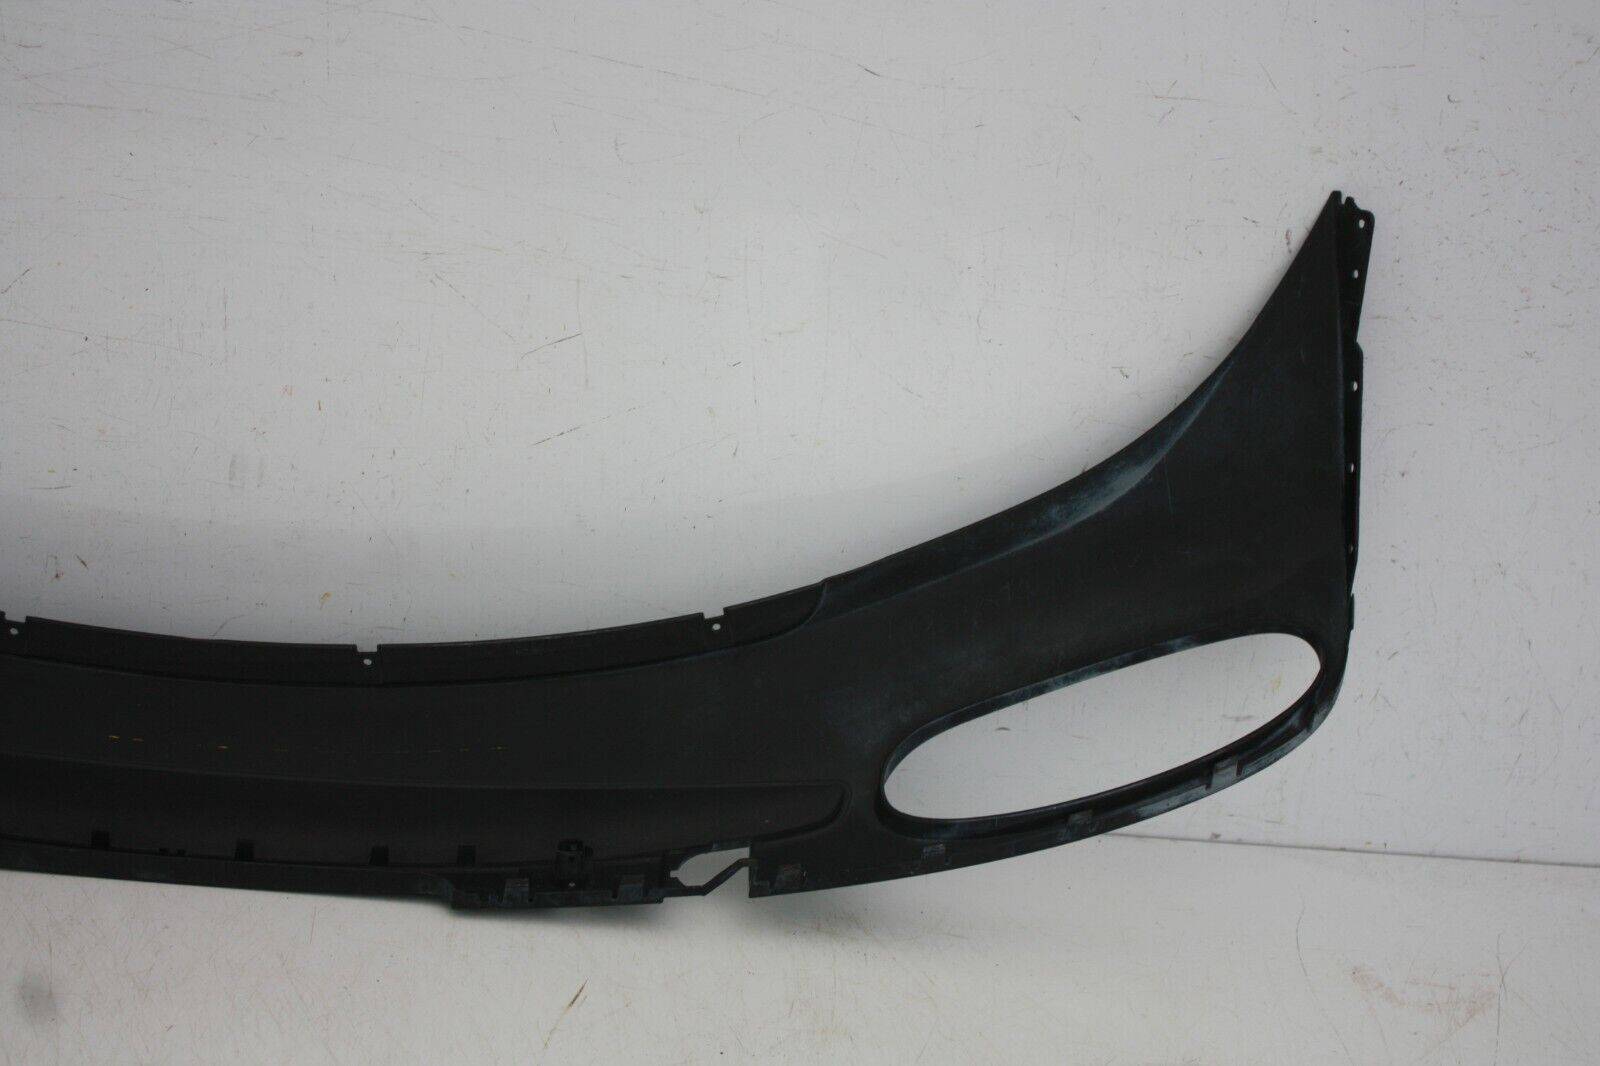 Bentley-Continental-GT-GTC-Rear-Bumper-Lower-Section-Genuine-2011-to-2014-175367537581-7